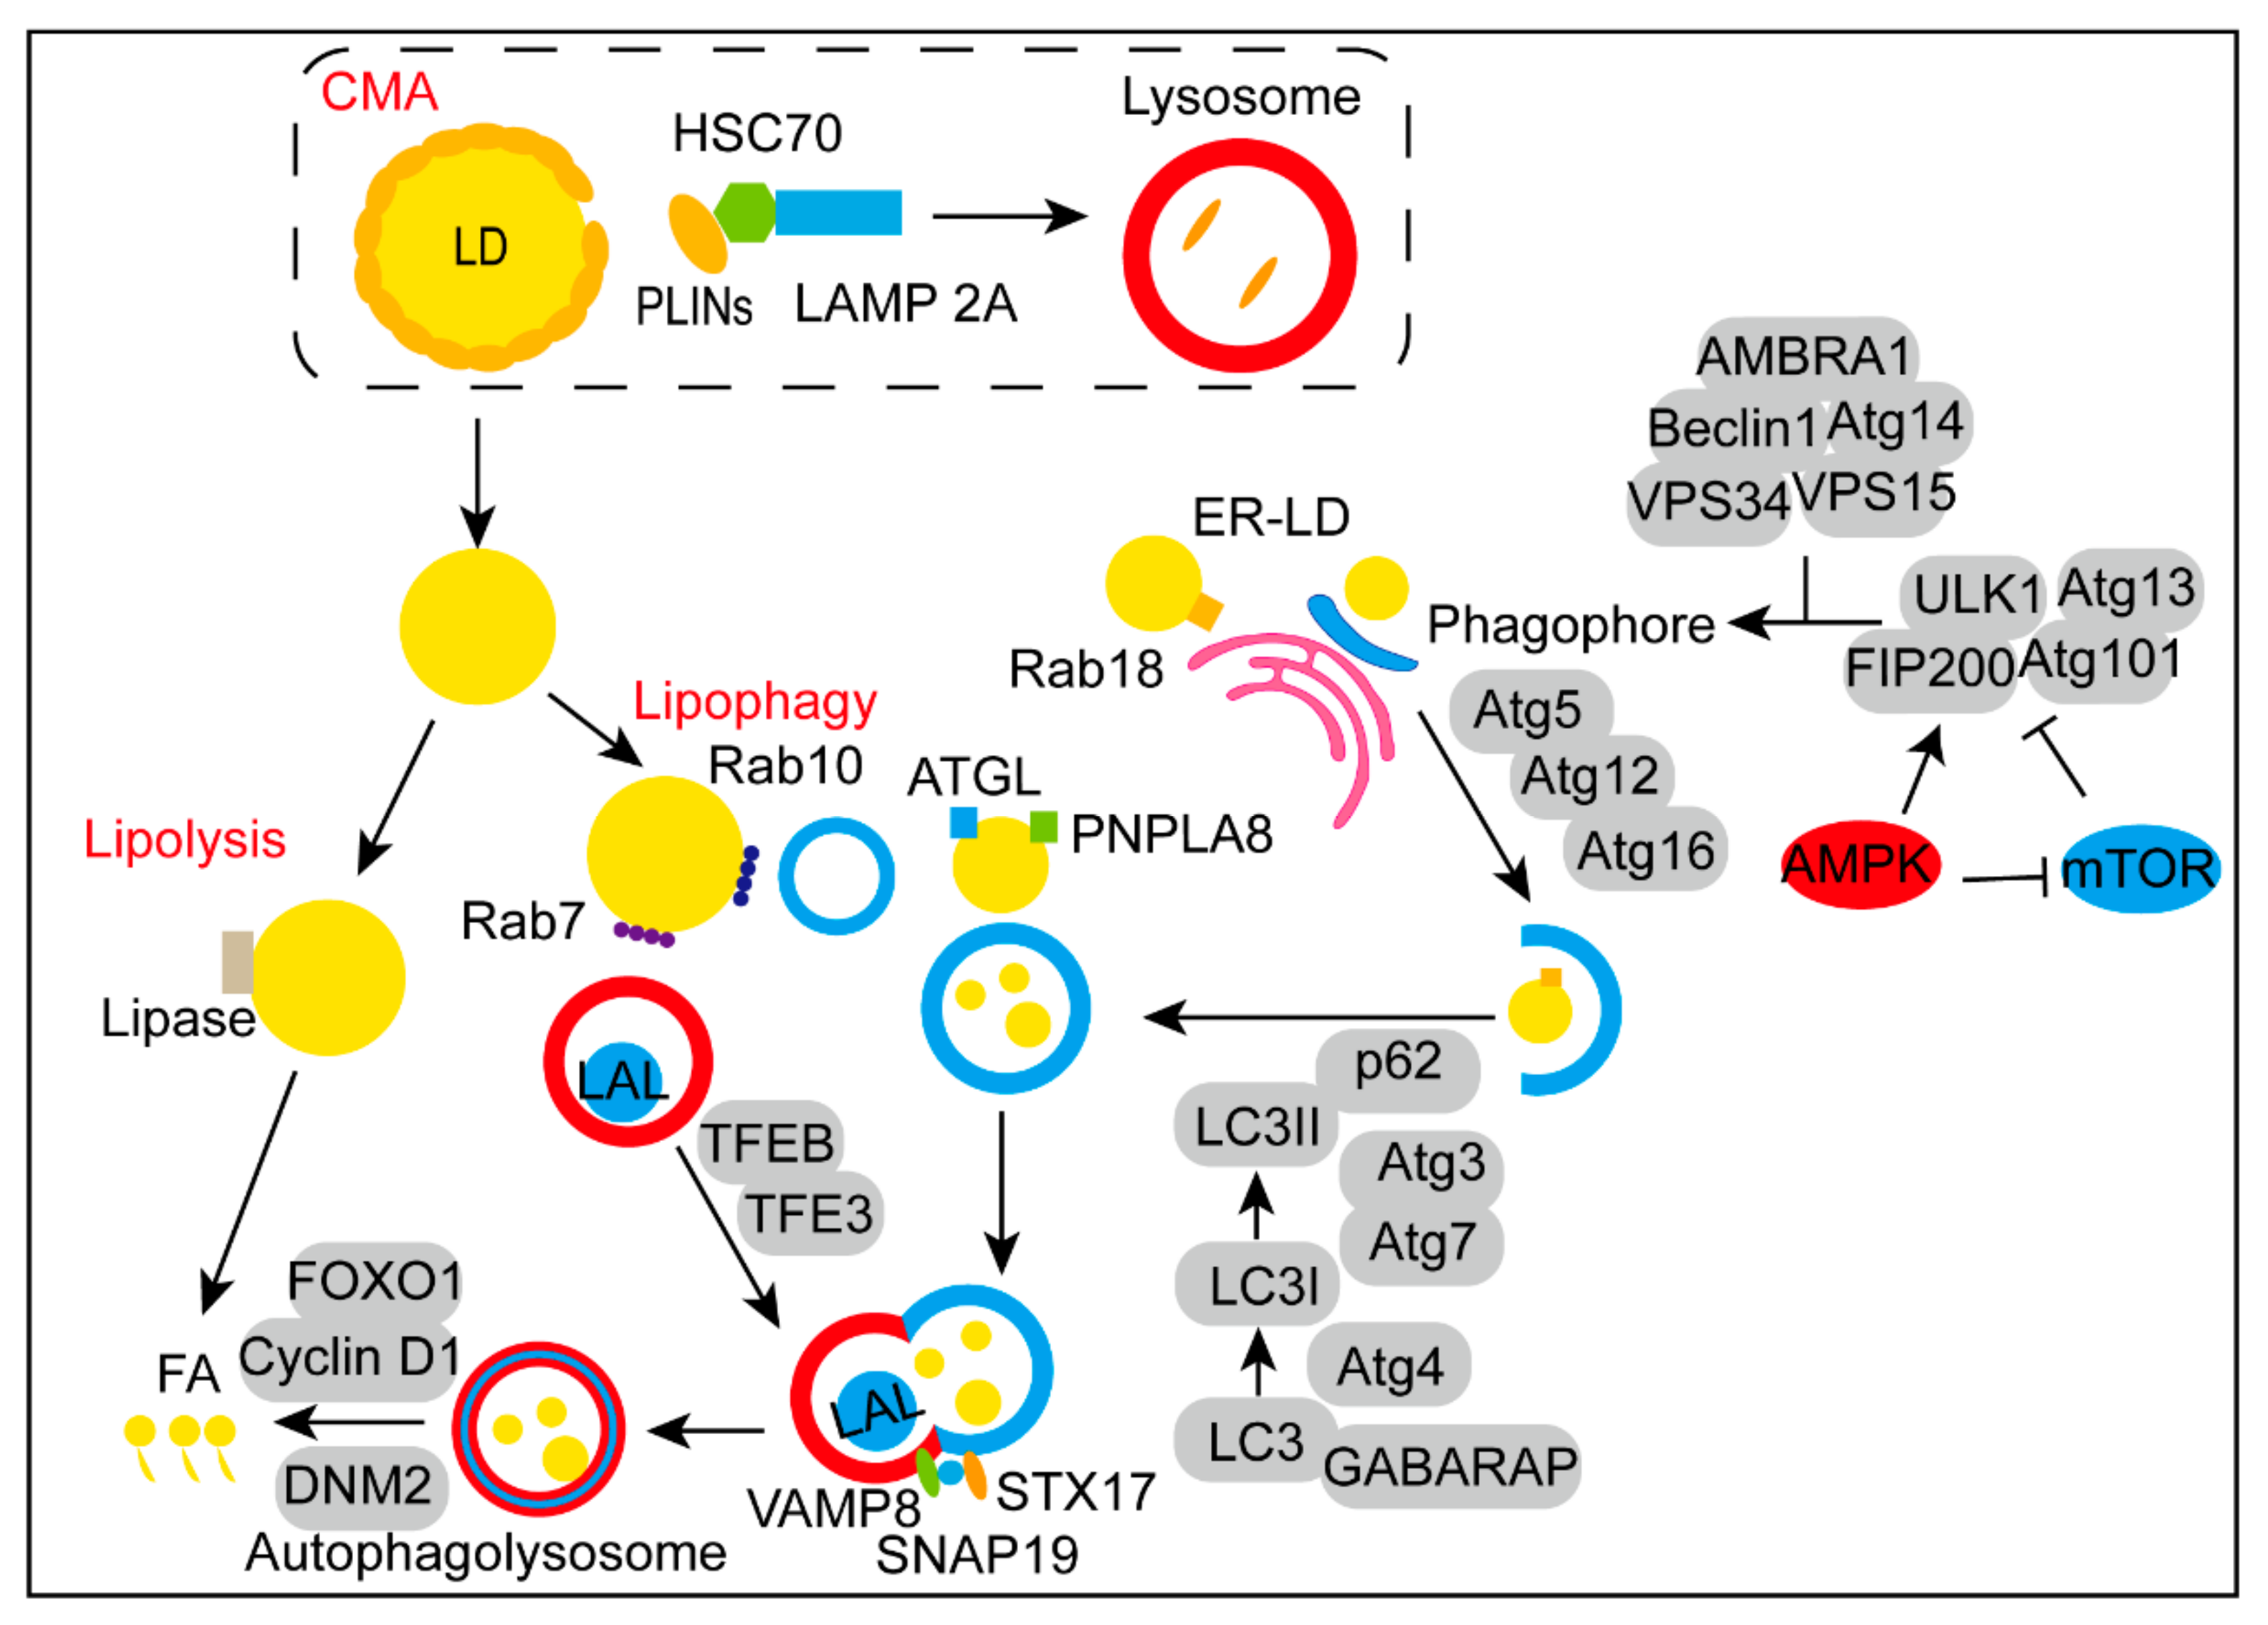 The fusion of autophagosomes and lysosomes is regulated by KDELR